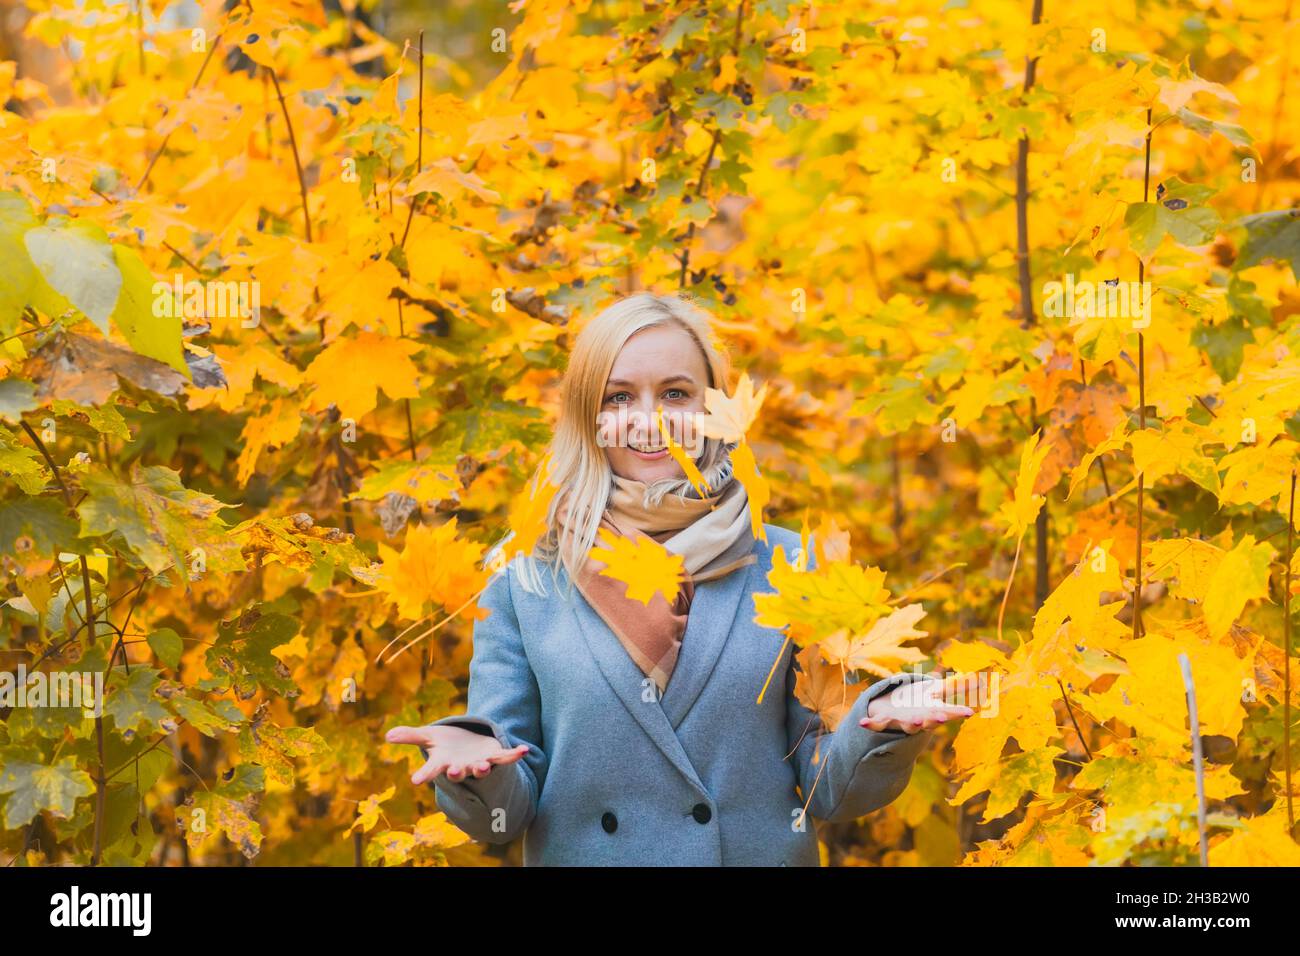 A smiling woman tossed up a bunch of leaves in a park against a background of trees. Authentic 40-year-old woman without retouching Stock Photo